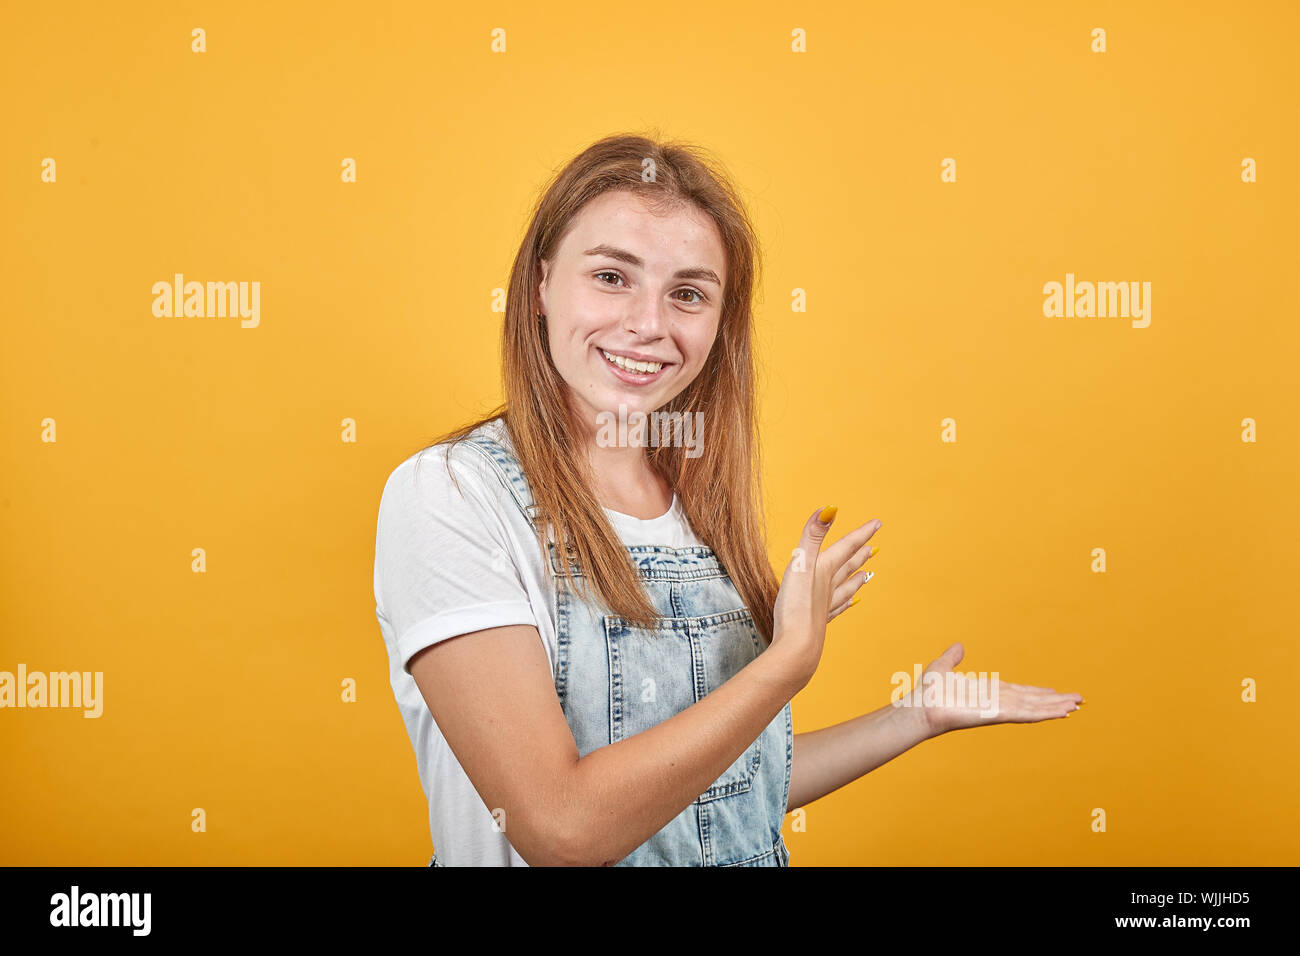 Young woman wearing white t-shirt, over orange background shows emotions Stock Photo